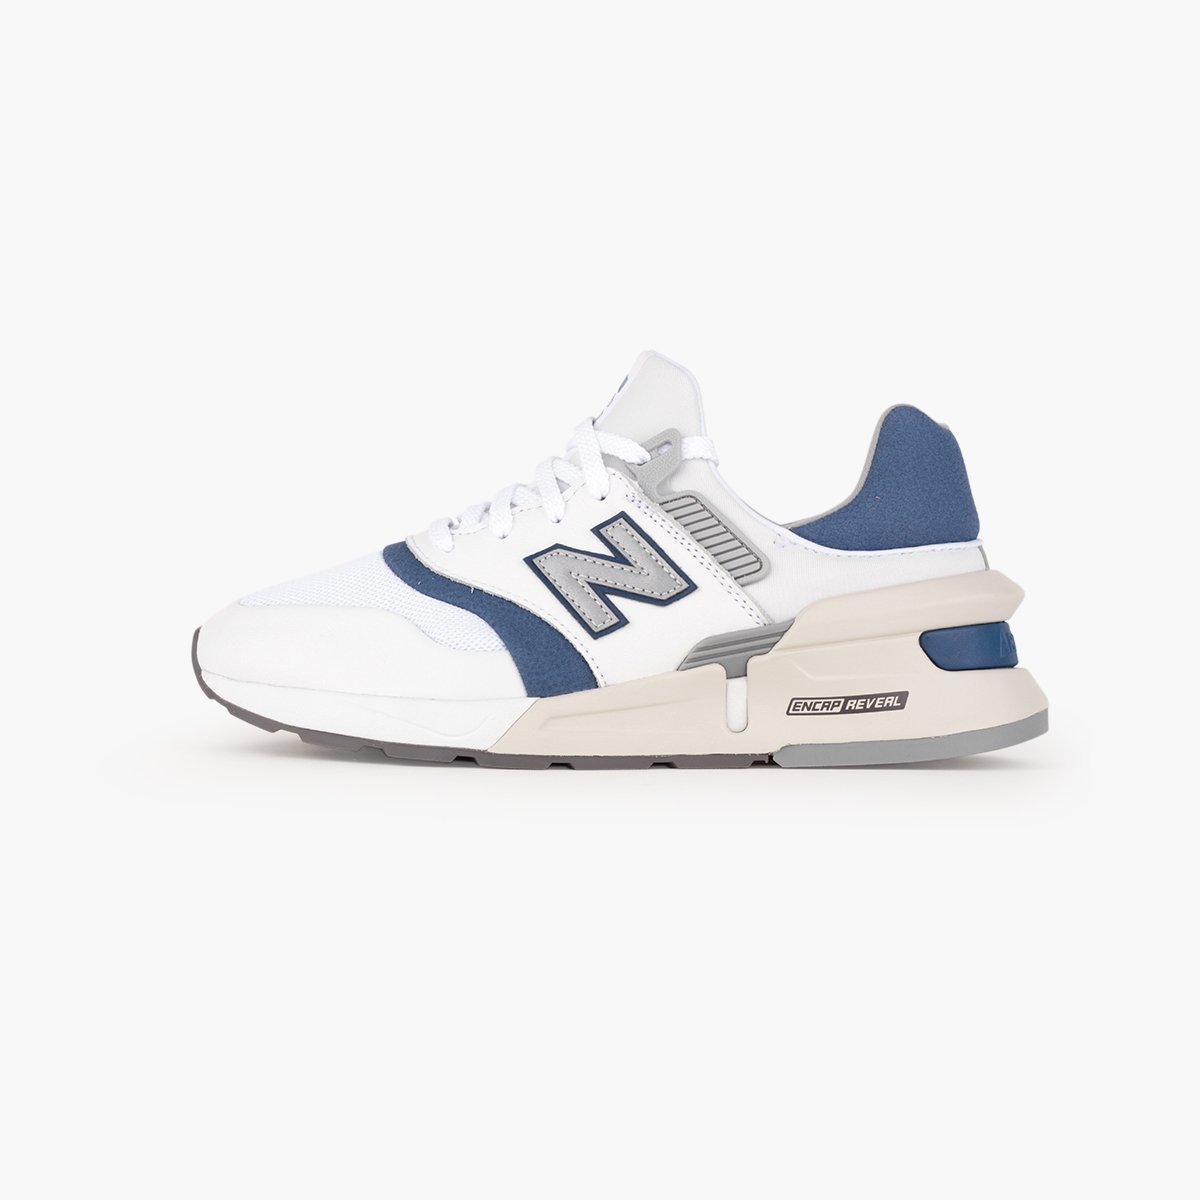 New Balance MS997HGD-SUEDE Store